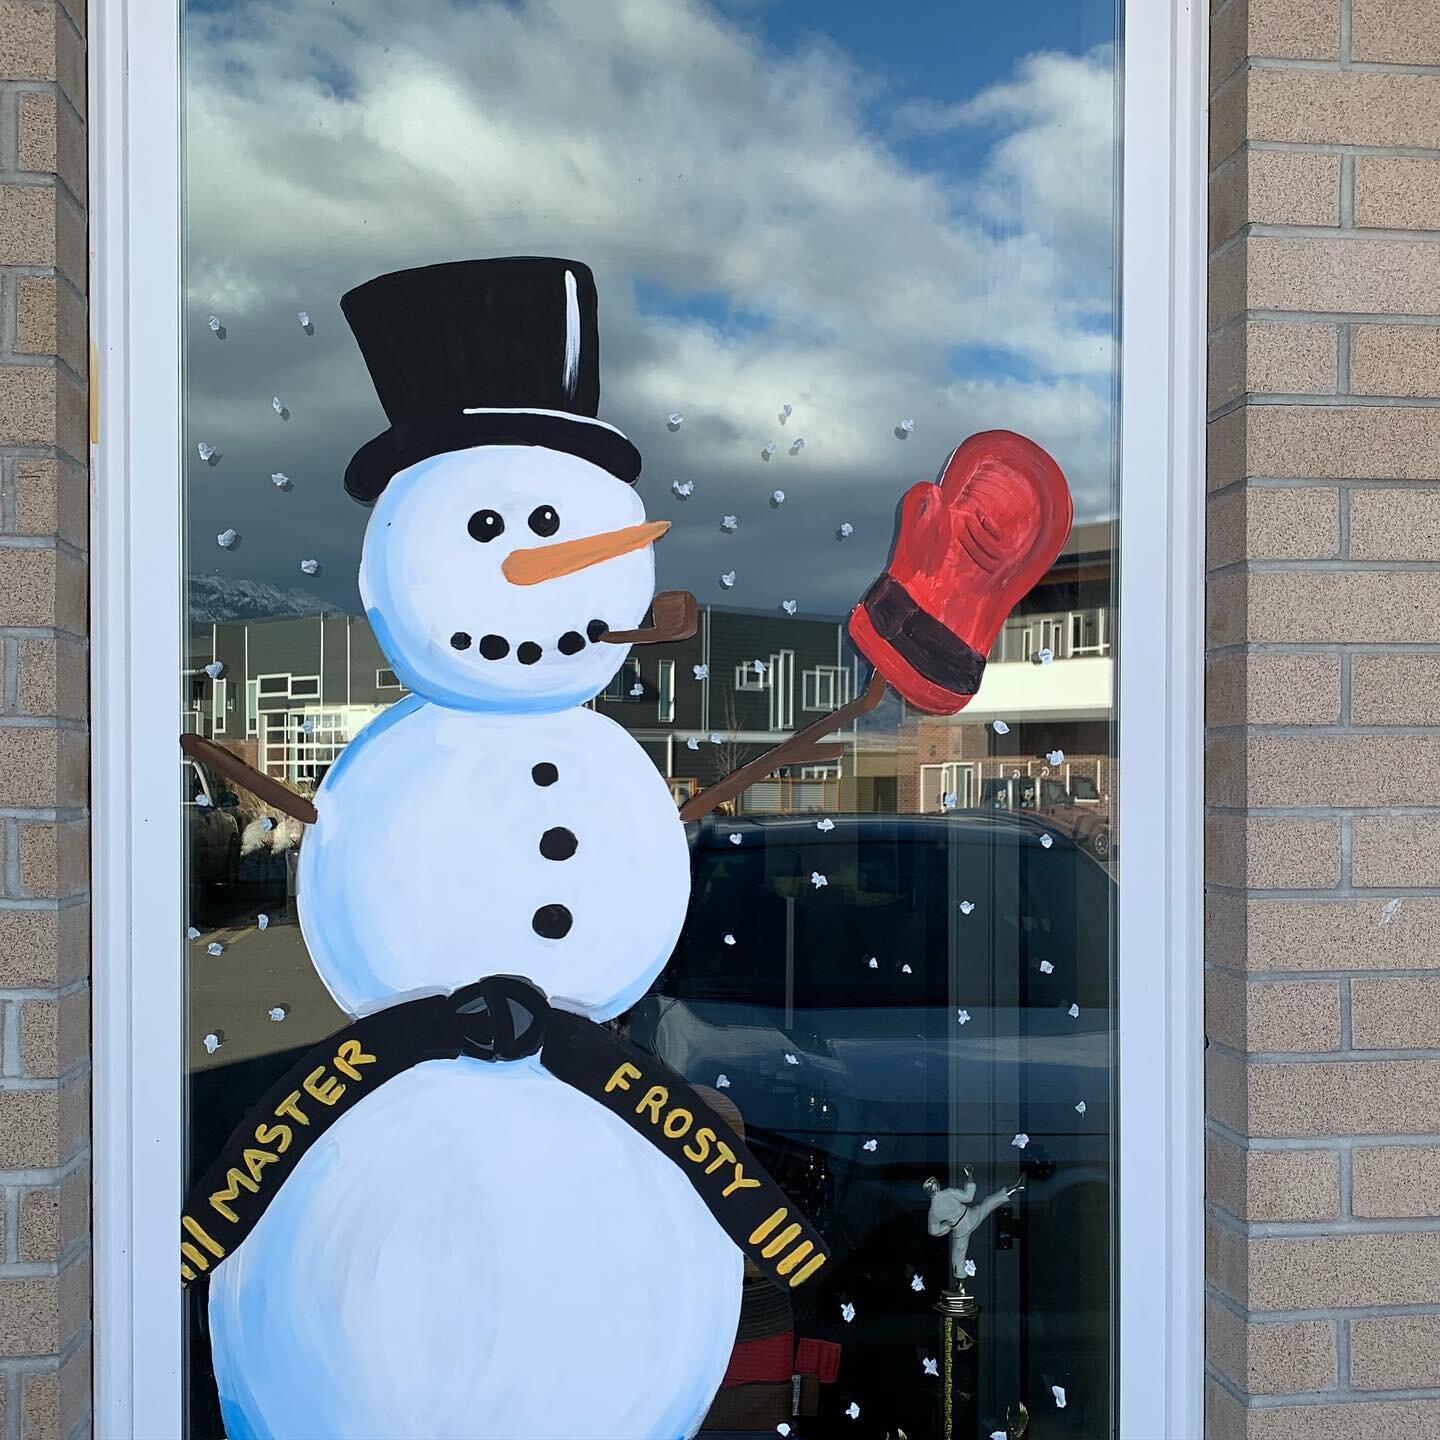 Don&rsquo;t forget to take a picture with the newest addition to Bozeman Taekwondo!  #frosty #tkd #bozeman #bozemanmt